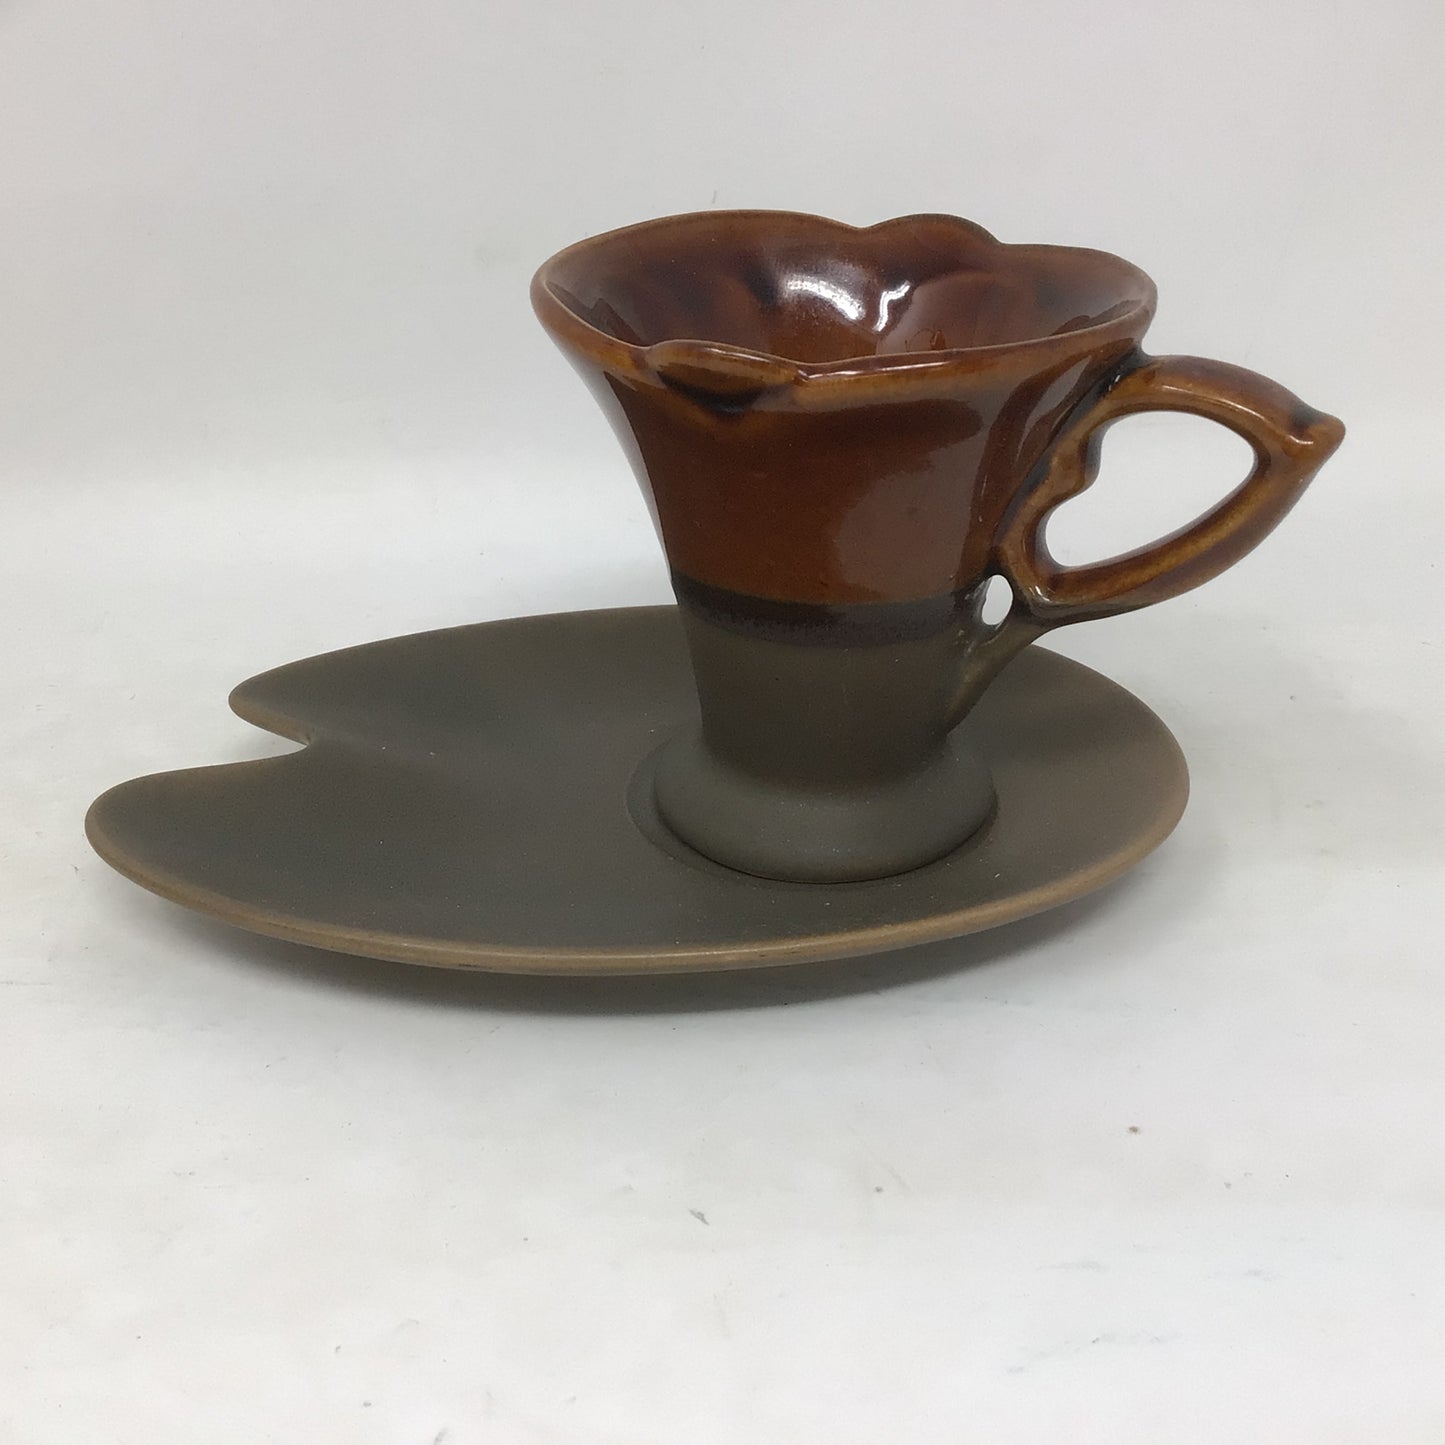 Demitasse Espresso Cups and Snack Plates with Stand